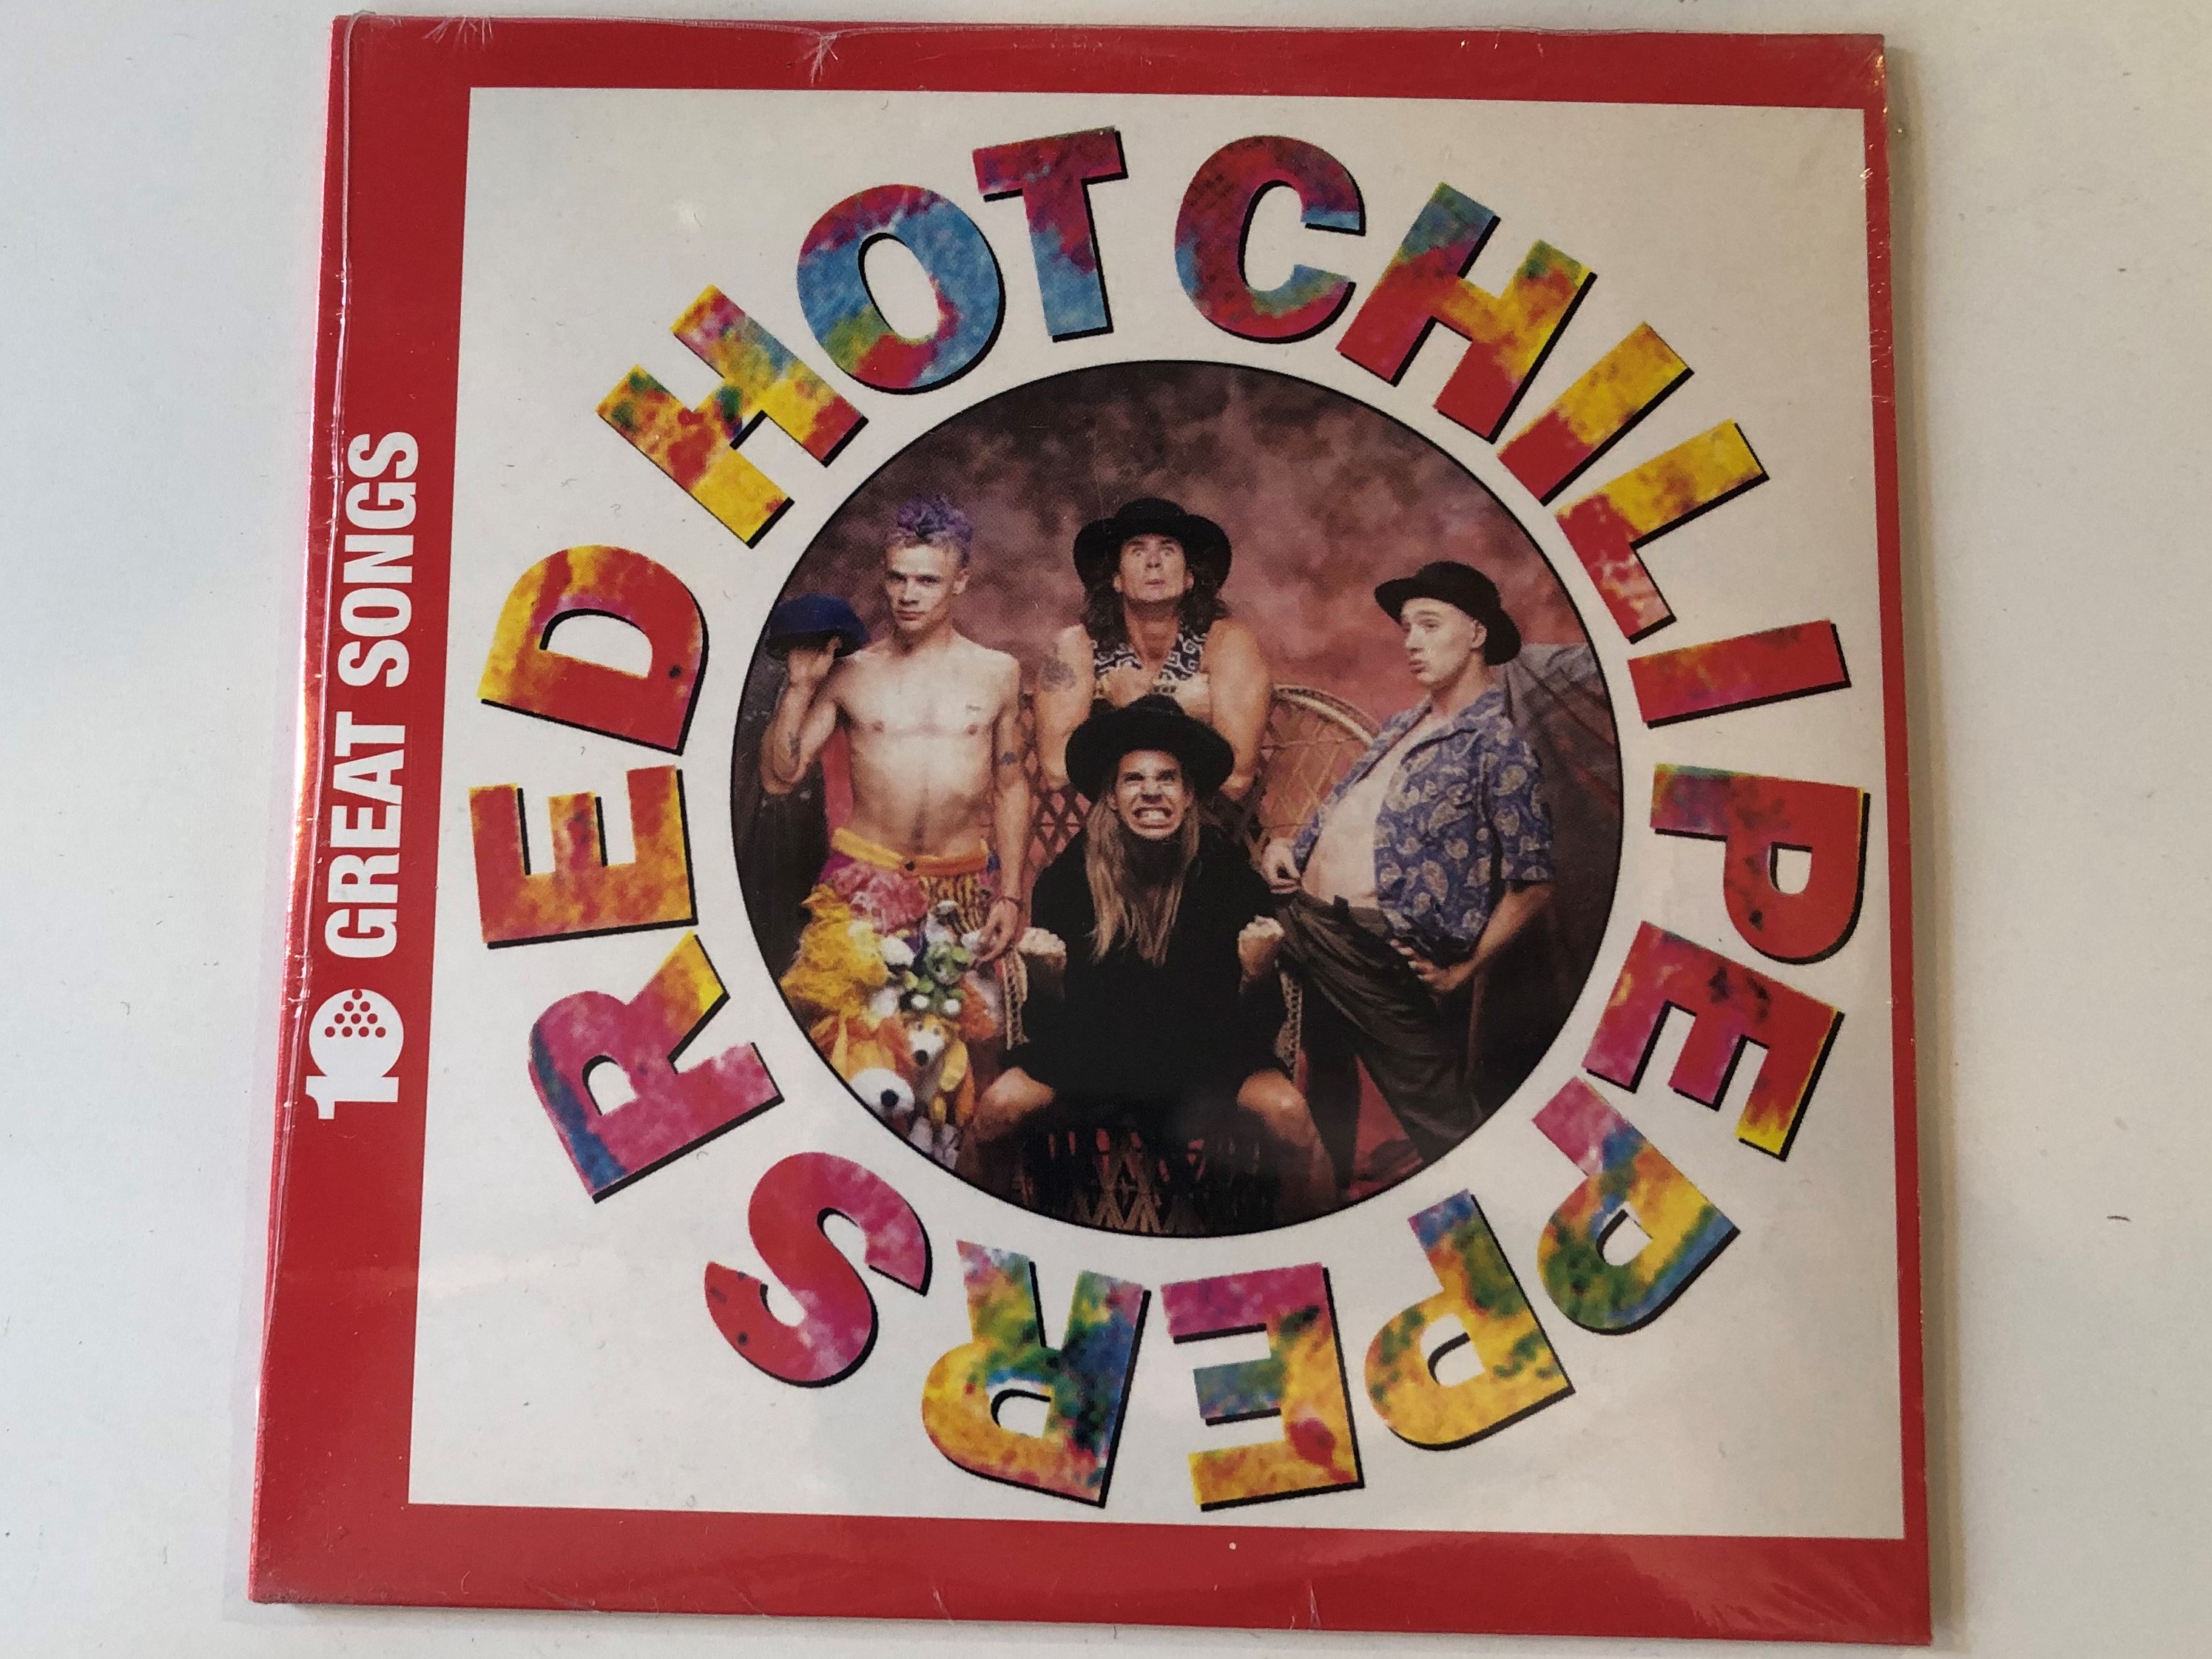 red-hot-chili-peppers-10-great-songs-emi-audio-cd-2009-5099945568121-1-.jpg